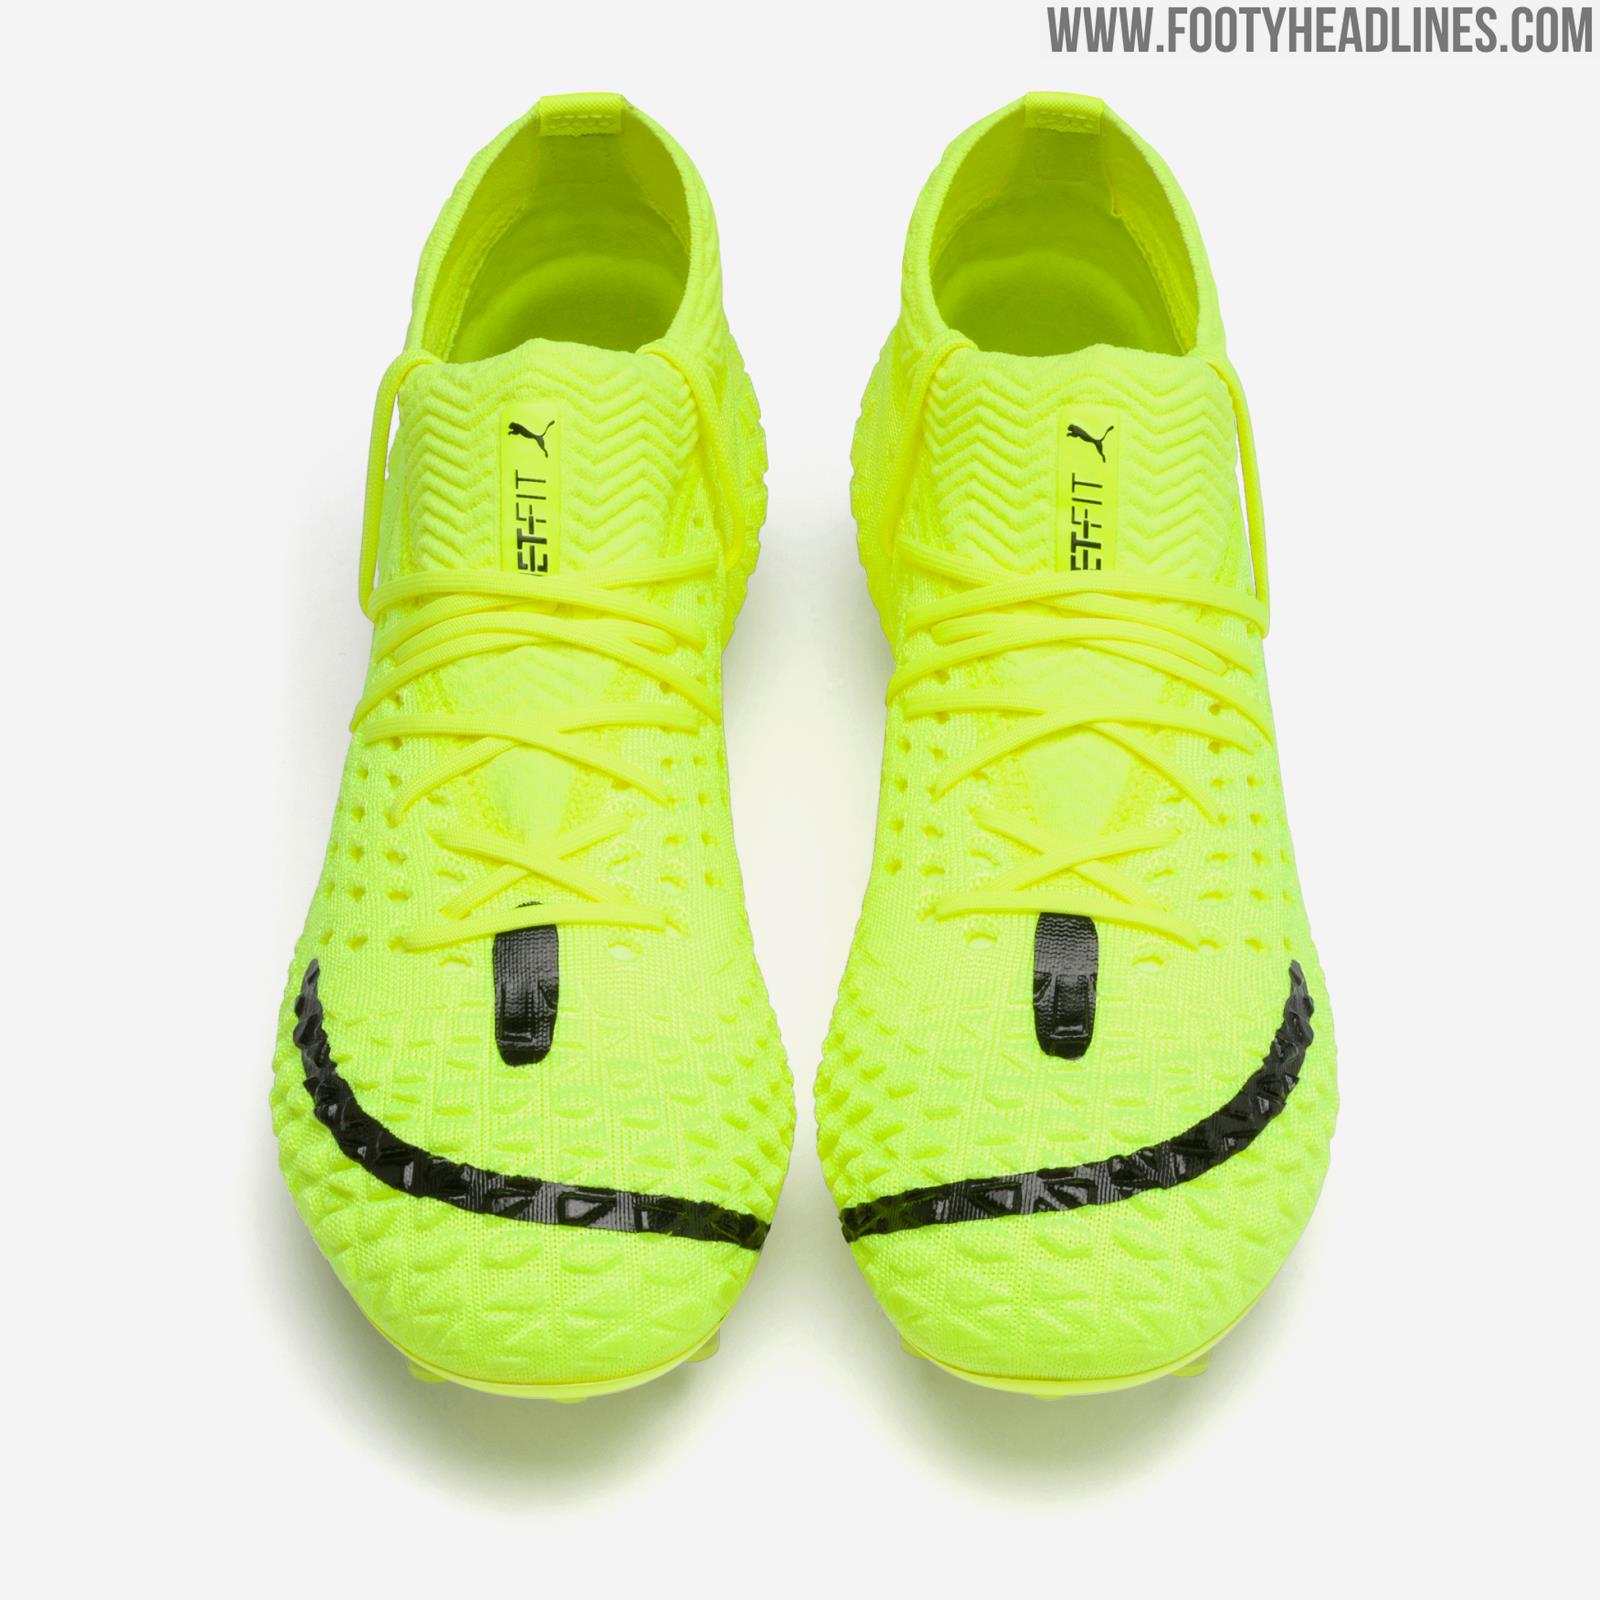 Limited-Edition Future "Grizi 10 Edition" Boots Released - Footy